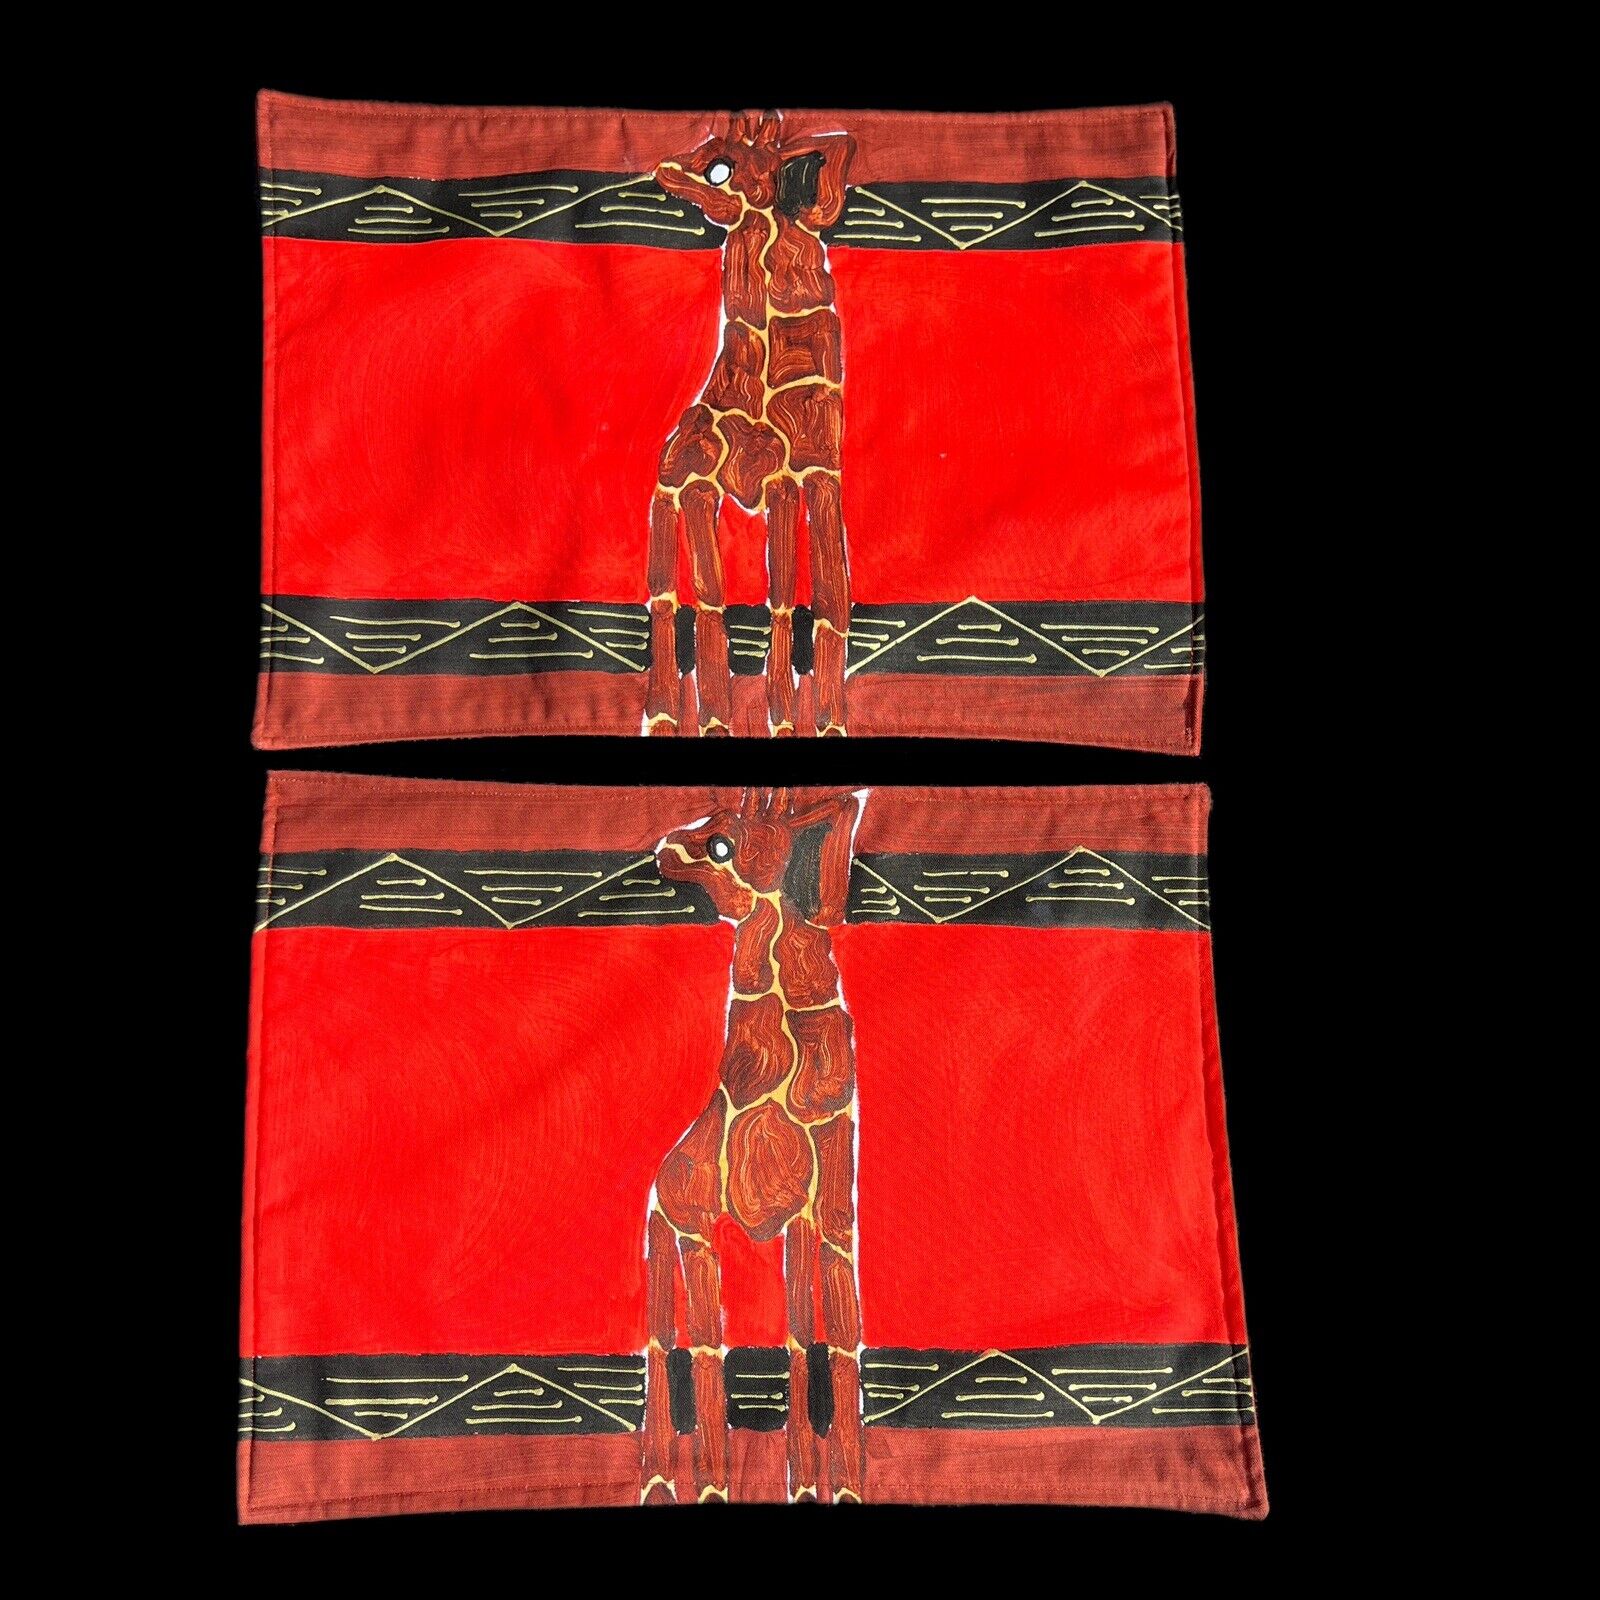 South Africa Nondyebo Art Hand Painted Animal Placemats Set Of 2 - Giraffe